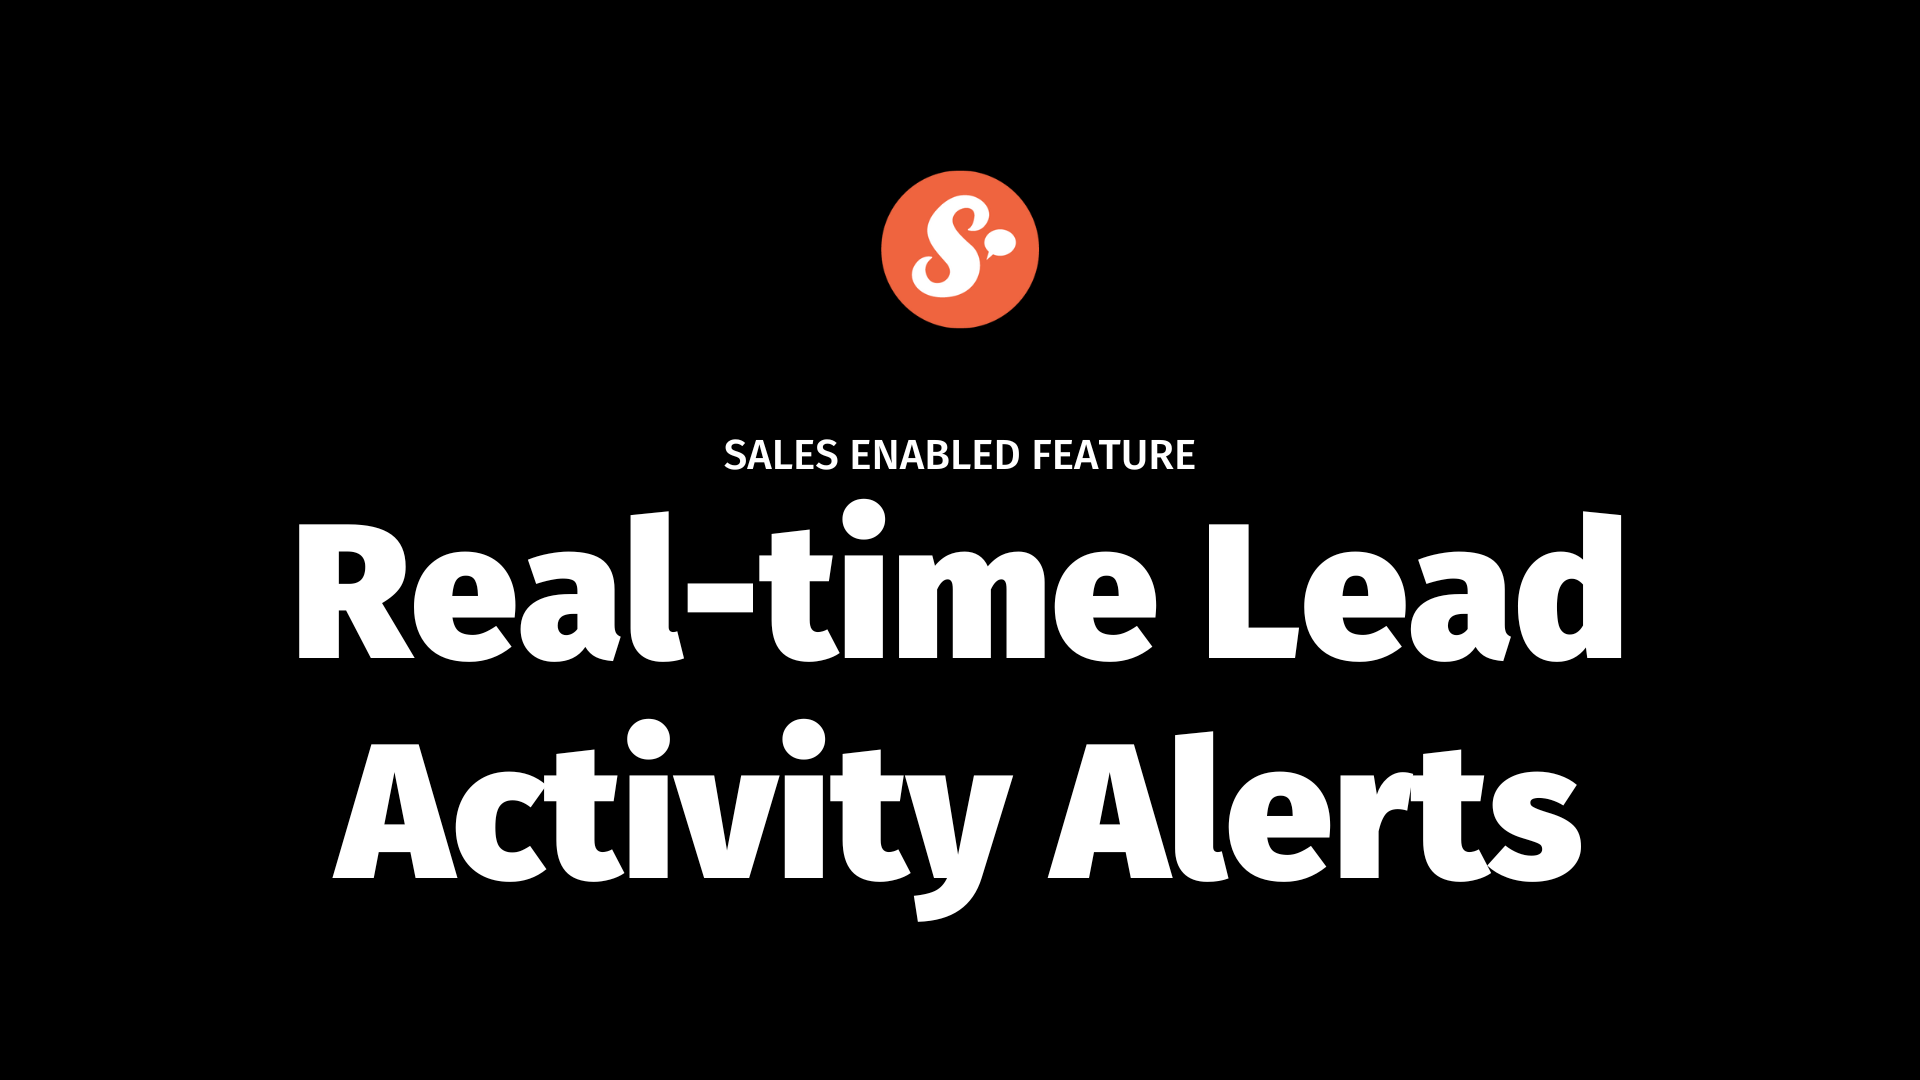 SALES ENABLED FEATURE Real time lead activity alerts